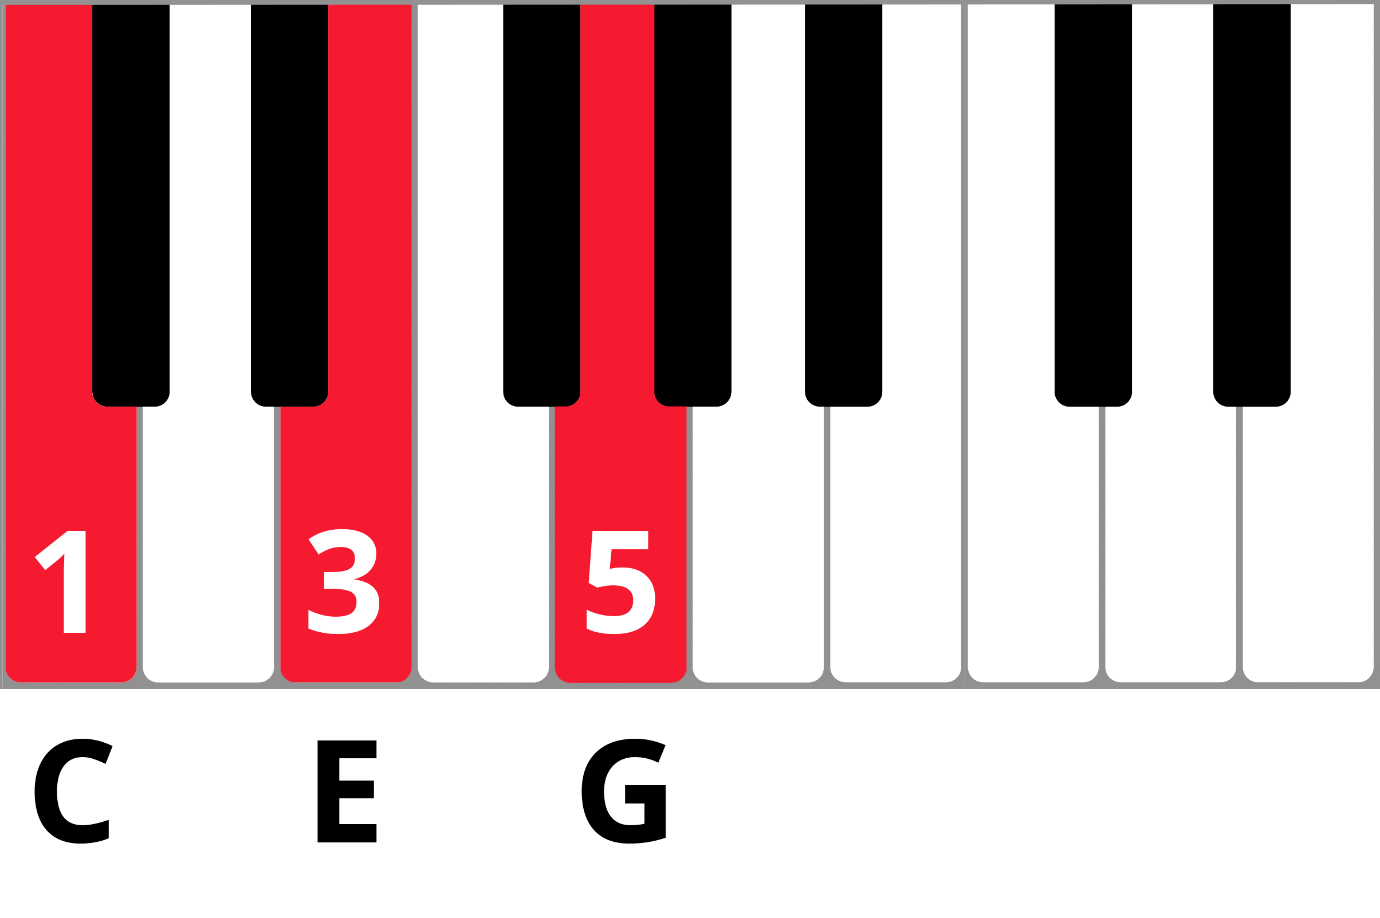 CEG chord highlighted in red on keyboard diagram with fingering 135.